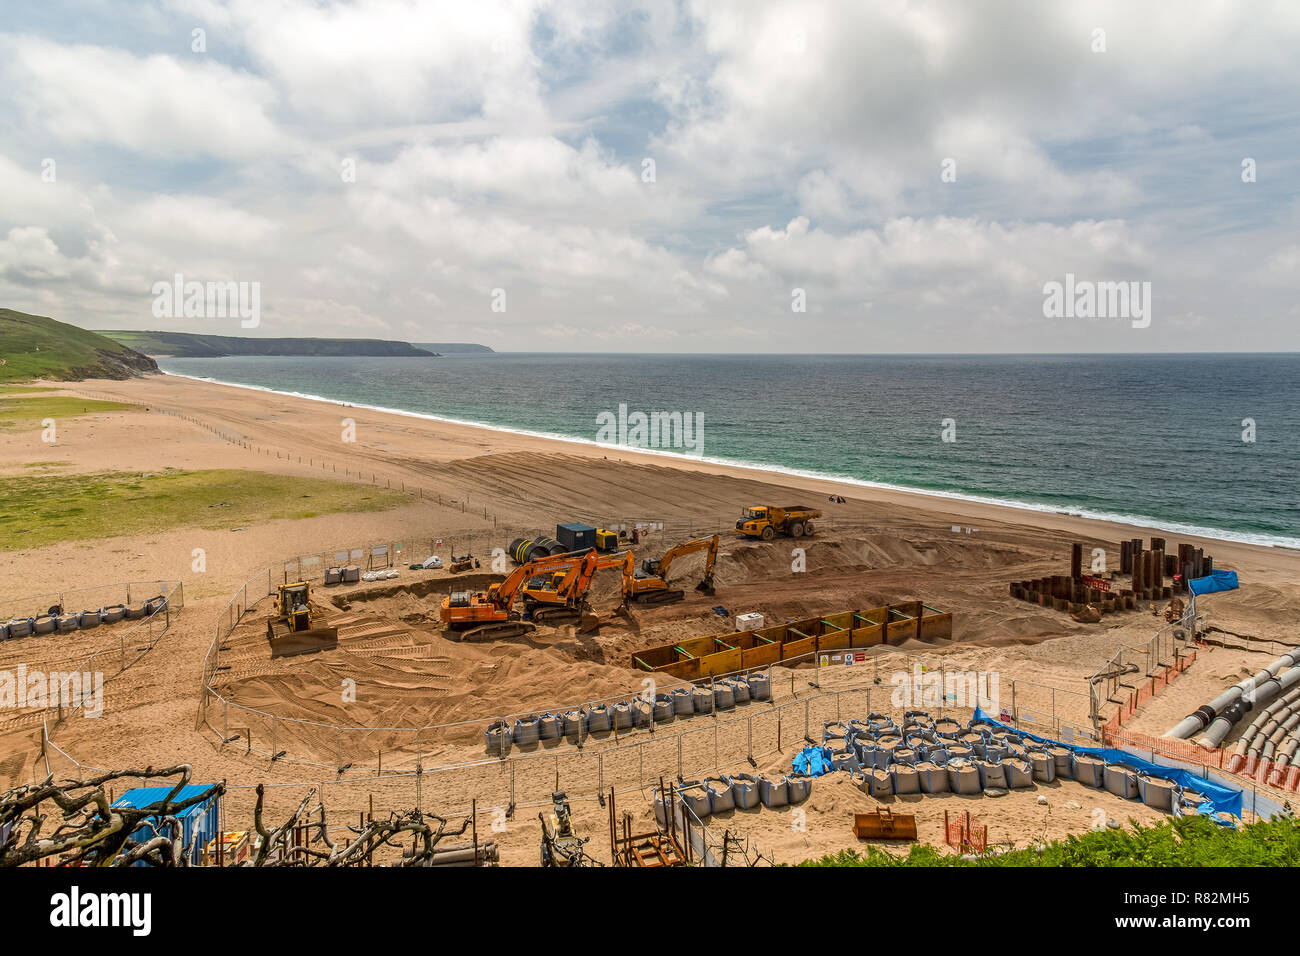 Emergency Overpumping Operations for the tunnel that discharges water flow from Loe Pool to the sea, just south of Porthleven in Cornwall, England. Stock Photo